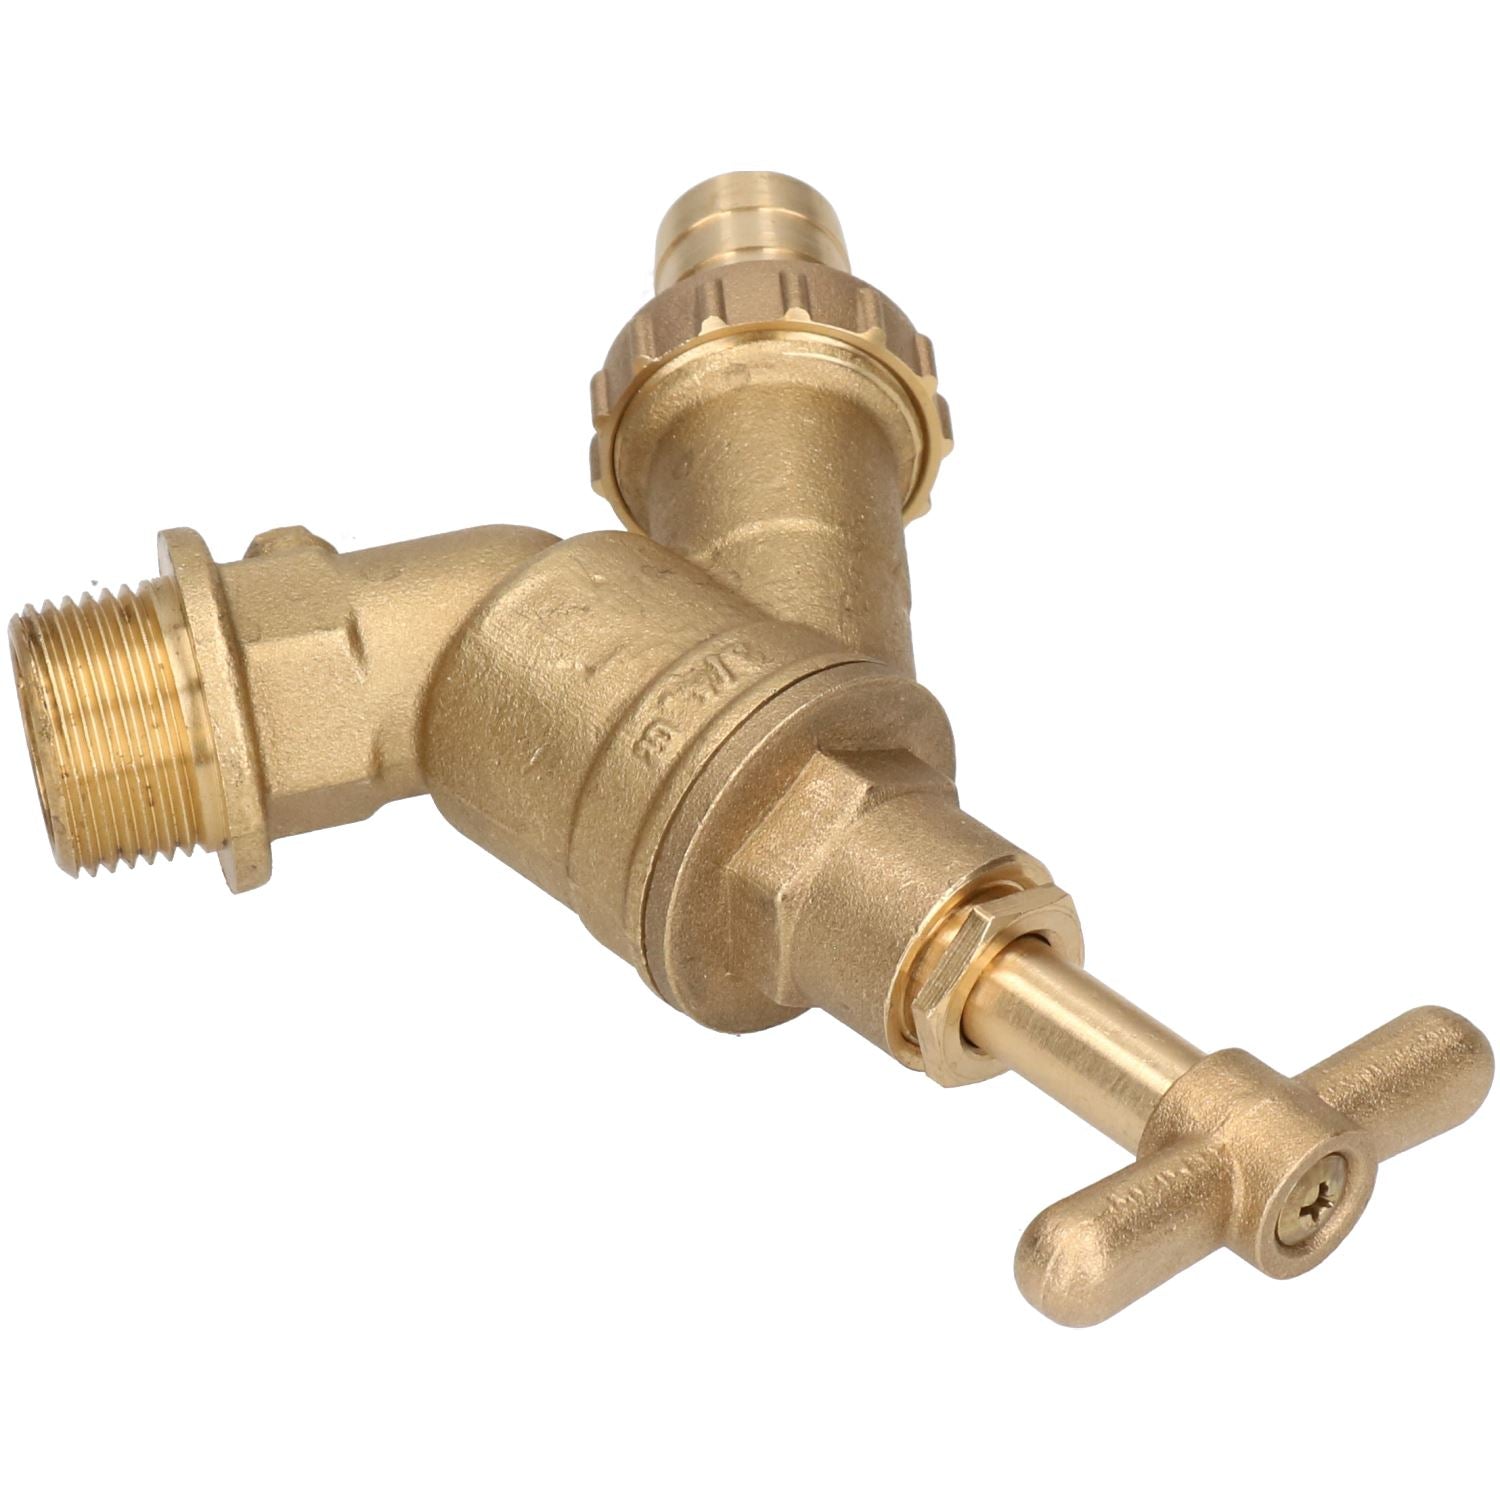 Large 3/4" High Flow Outside Garden Tap with Double Check Valve 3/4"